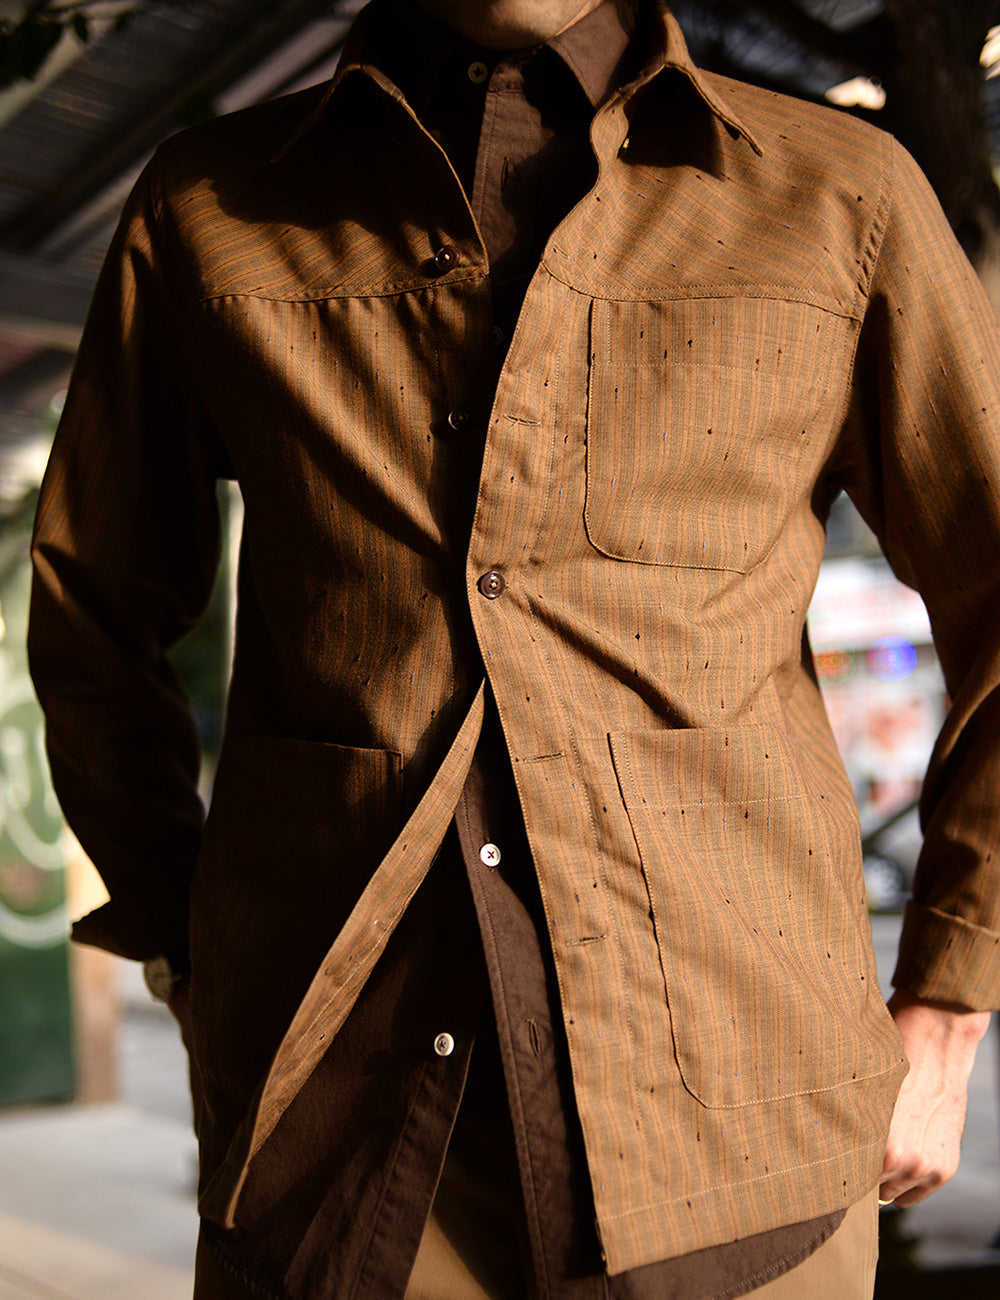 Close-up image of a model wearing a brown button down shirt with a tan shirt jacket worn over.